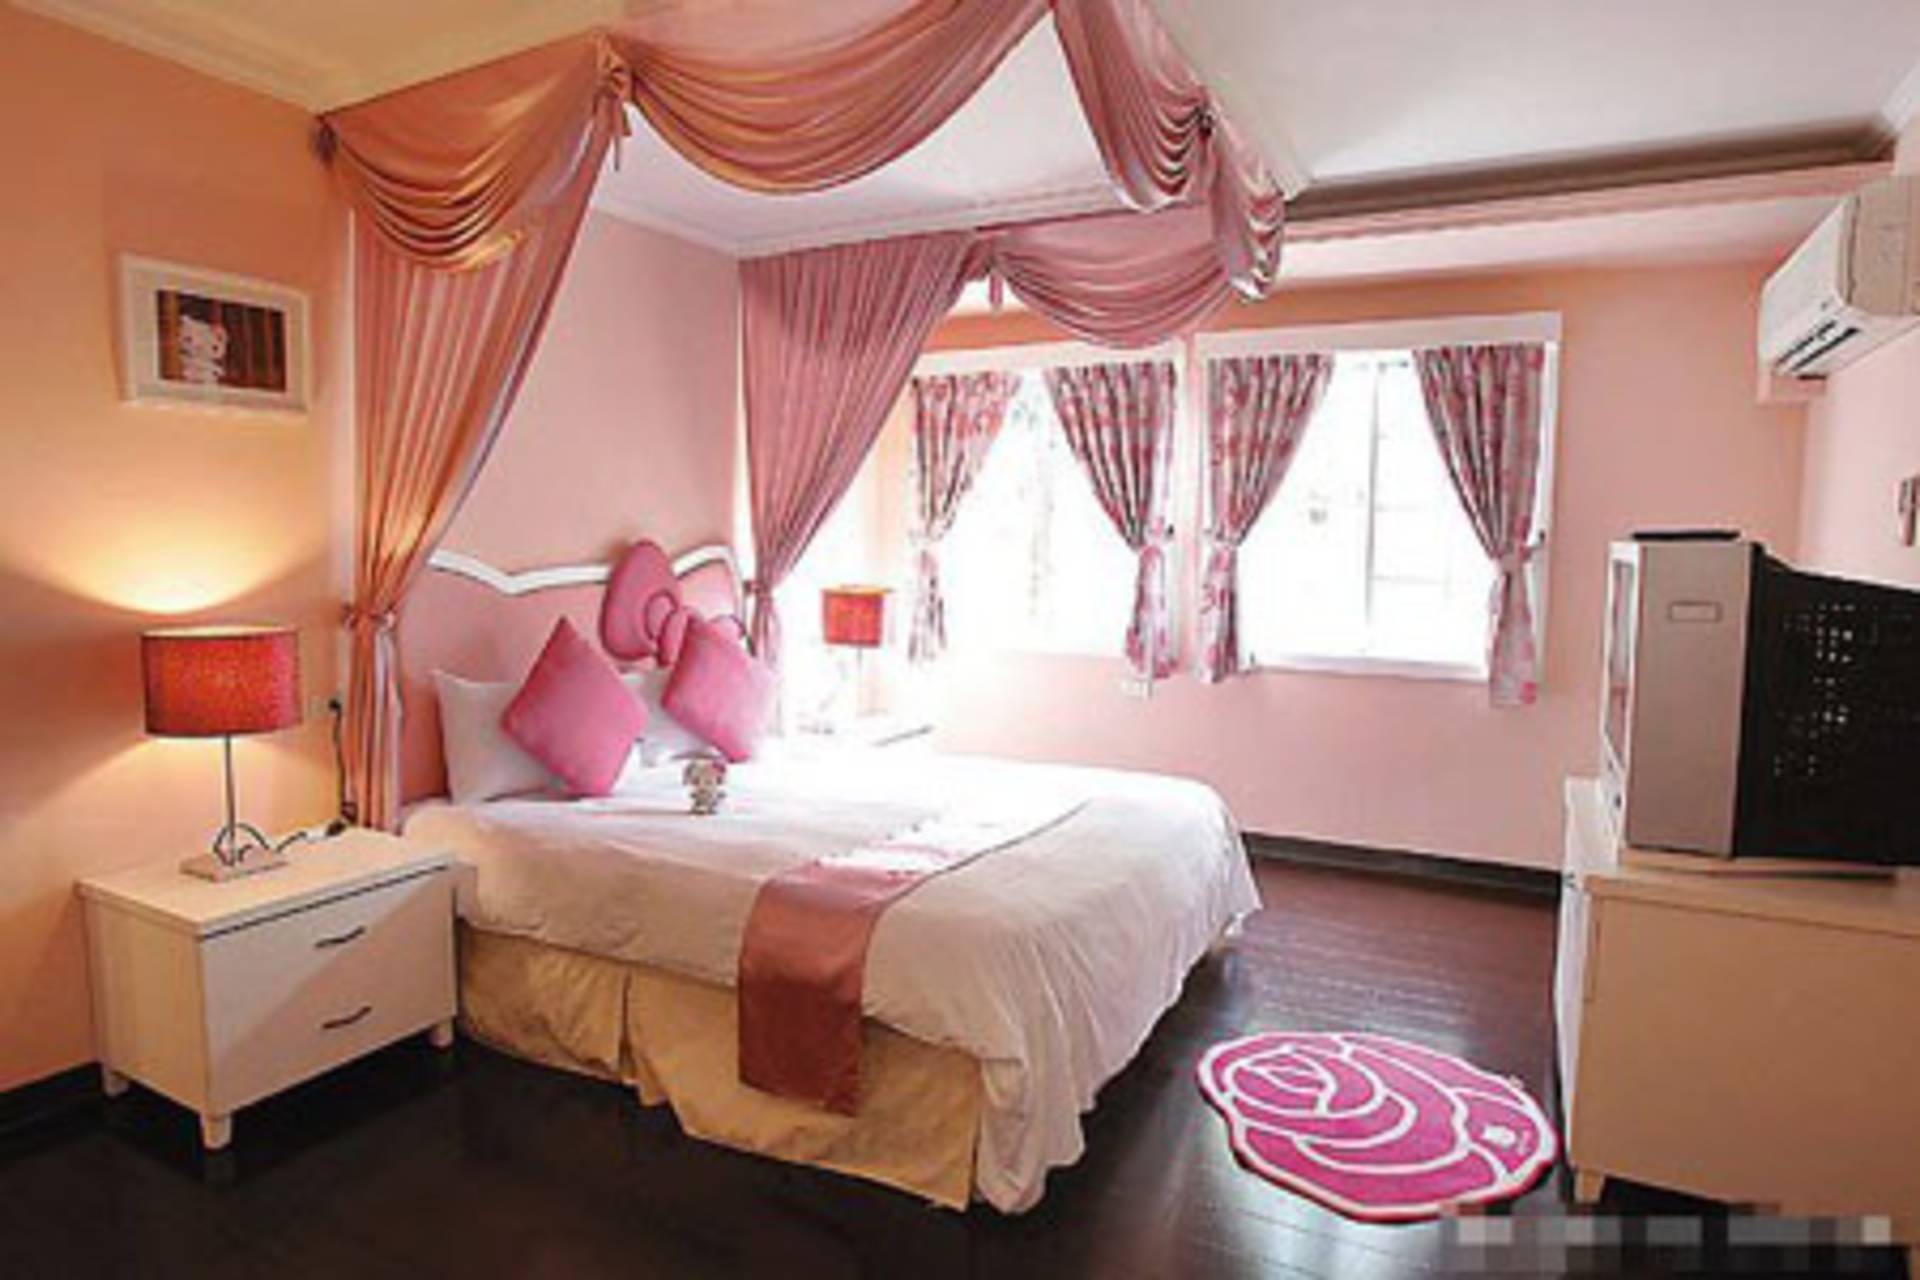 The House  Of A Dream Coloured Pink Hello  Kitty  Theme 